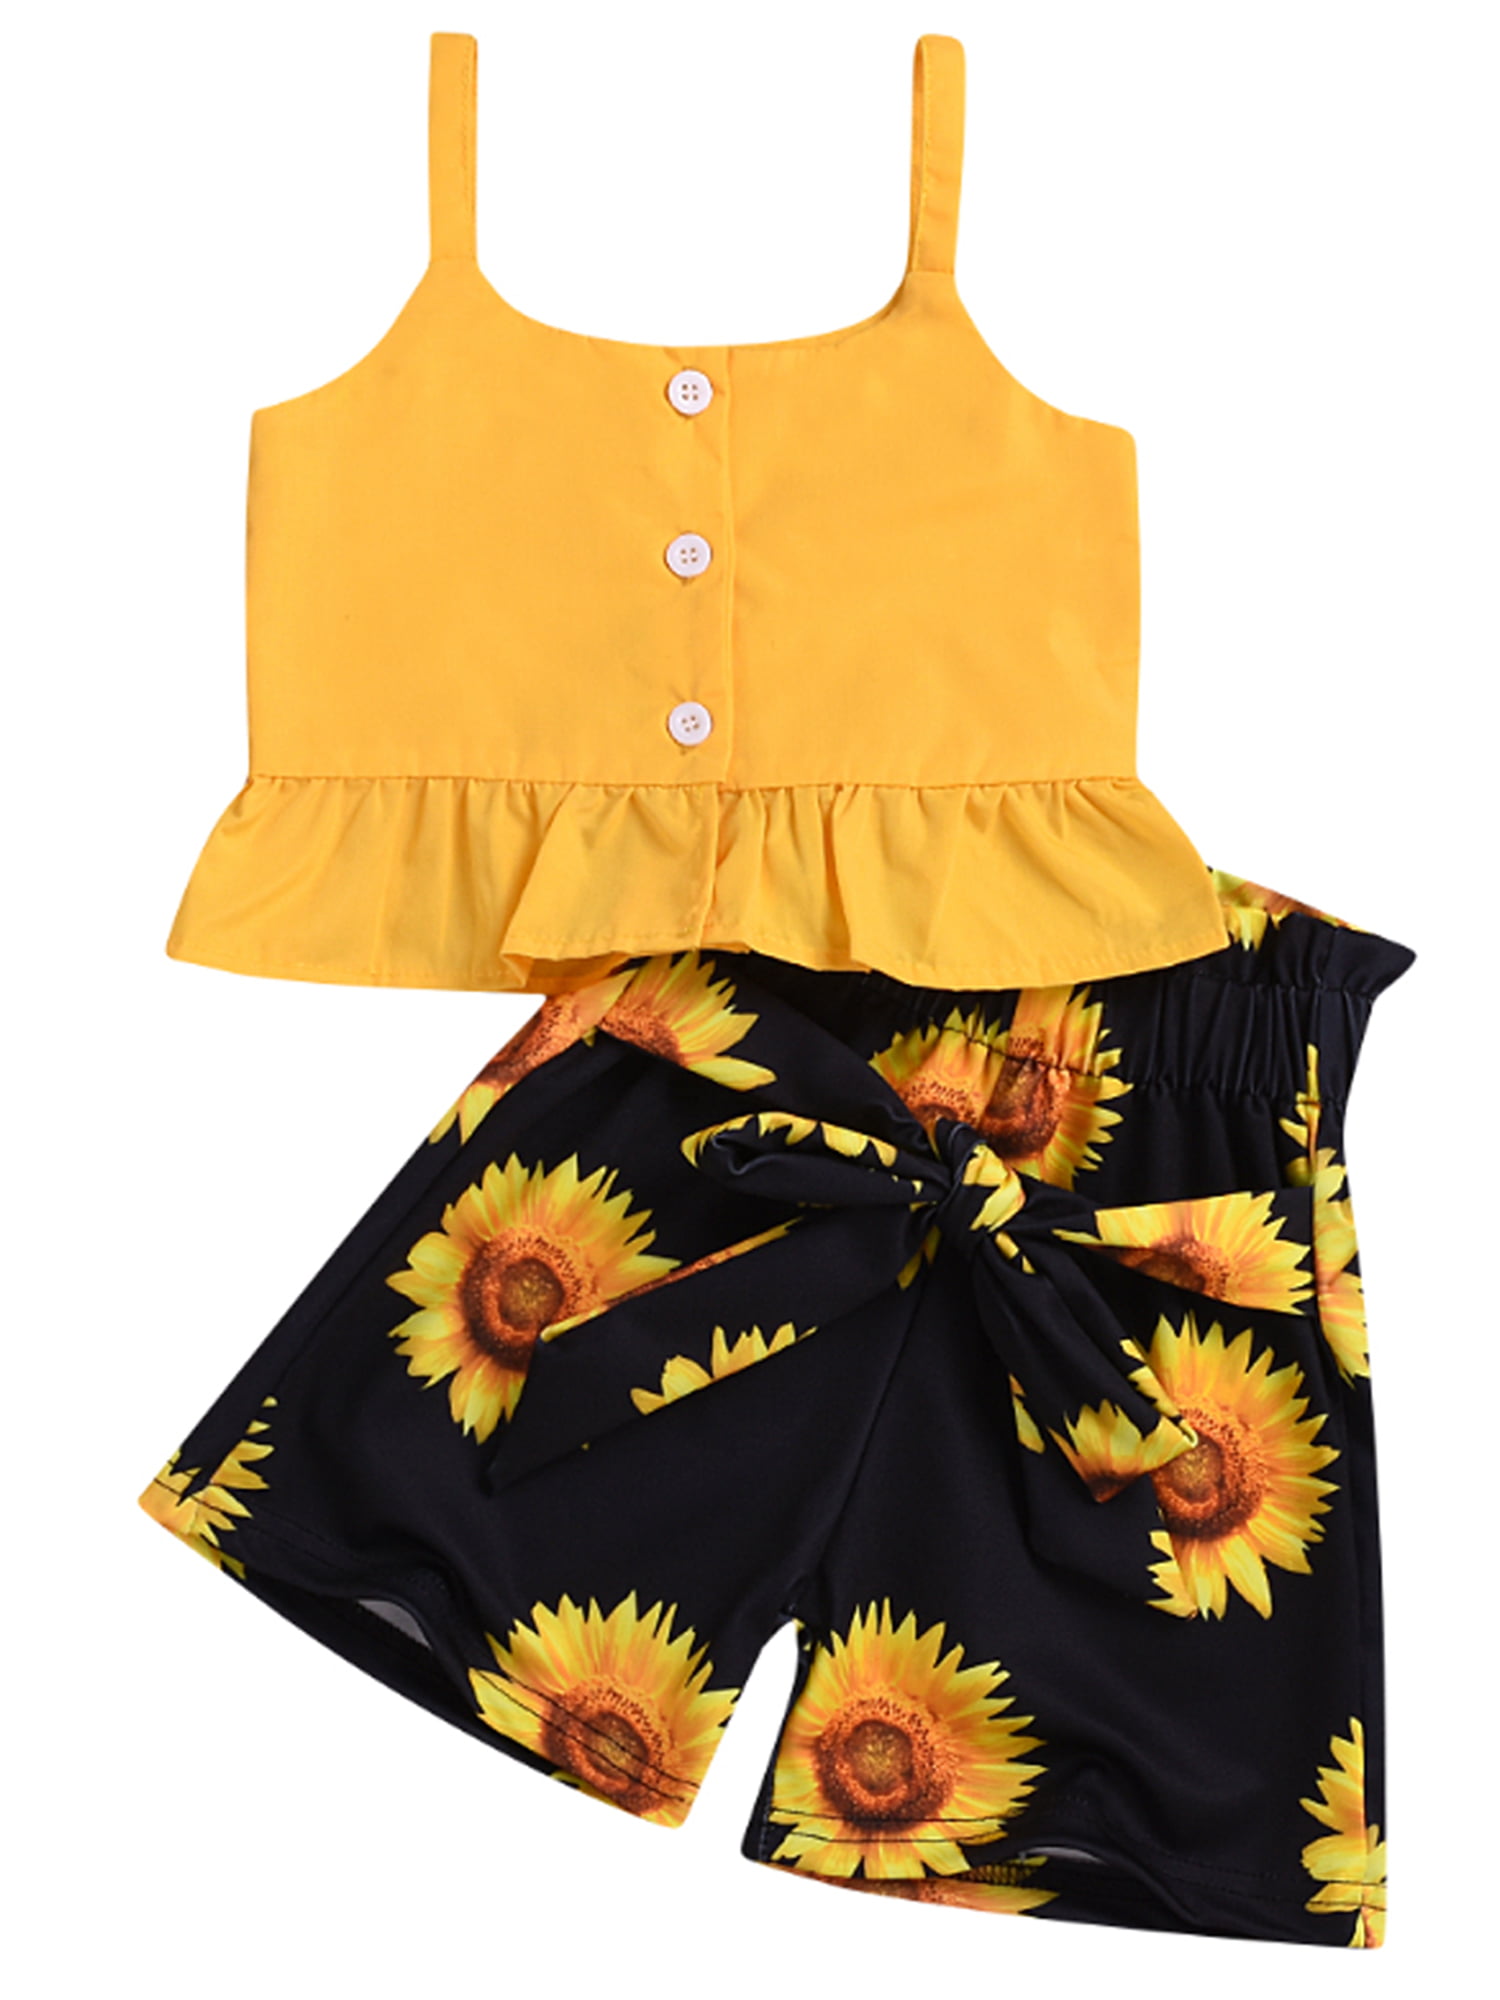 Details about   Kids Baby Girl Clothes Sleeveless Button Ruffles Tops Dress Flower Outfits 2Pcs 